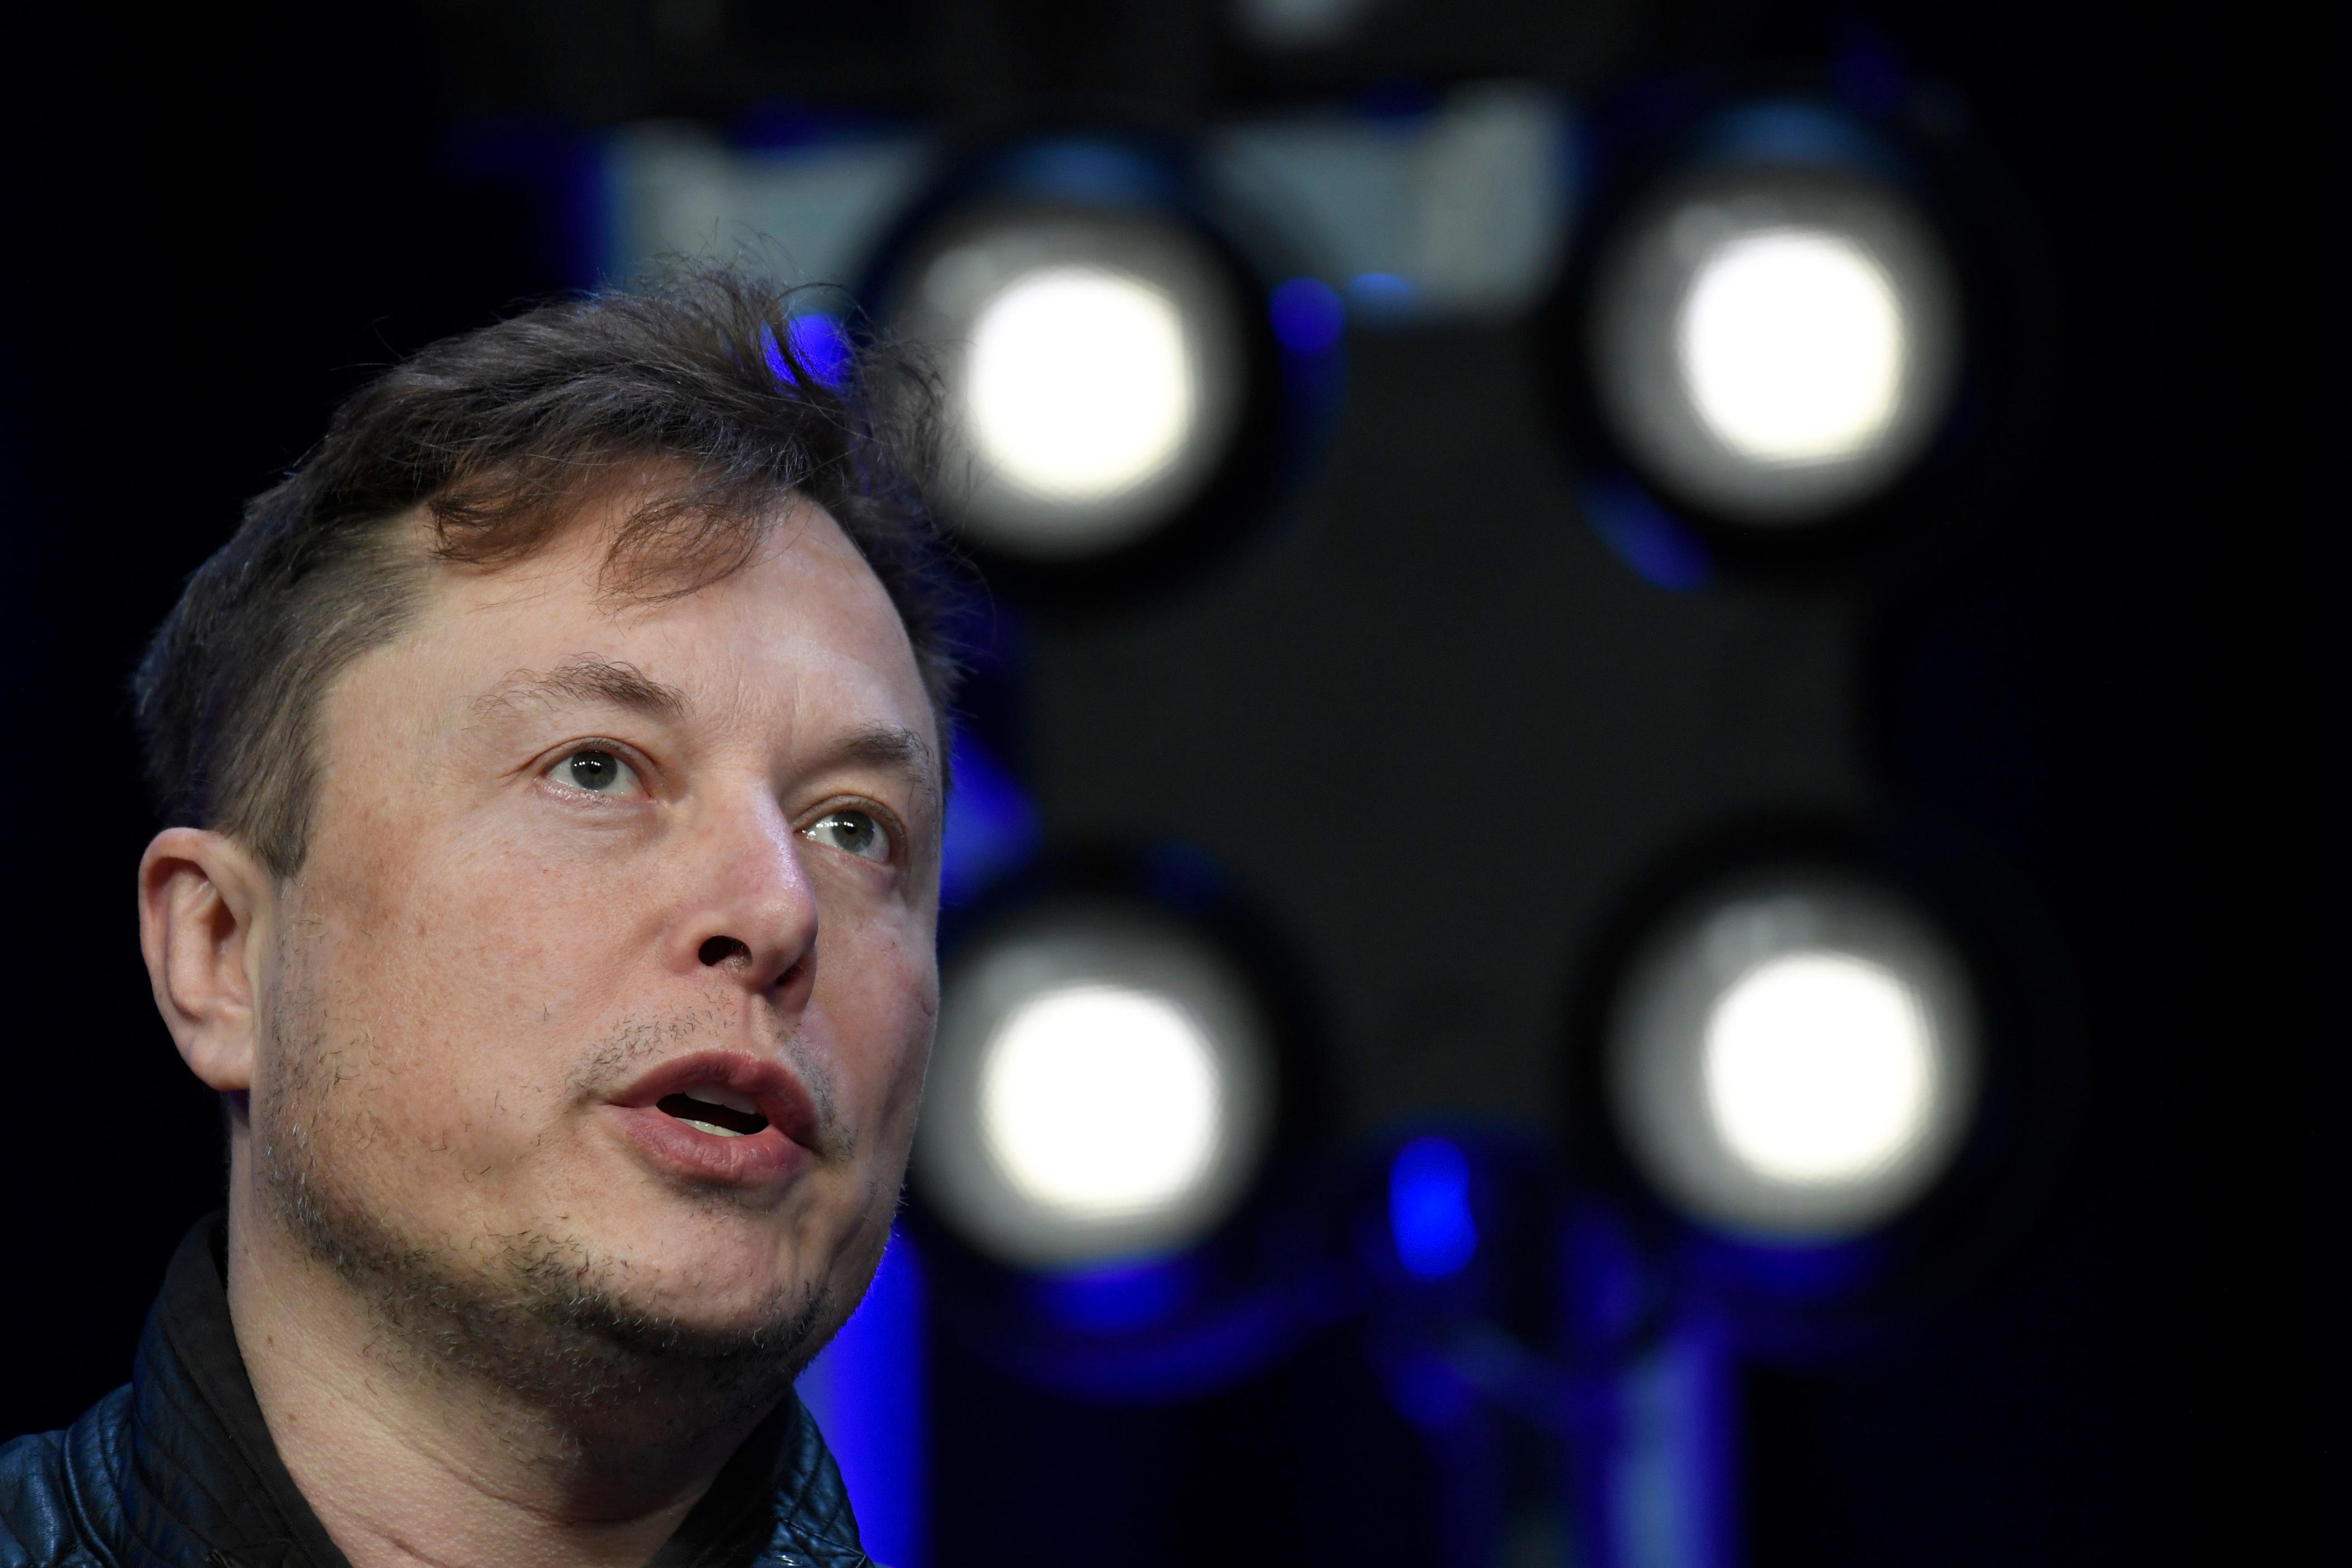 an internal twitter document reportedly shows ad revenue down 59%, casting doubt on elon musk's statement that 'almost all advertisers have come back'